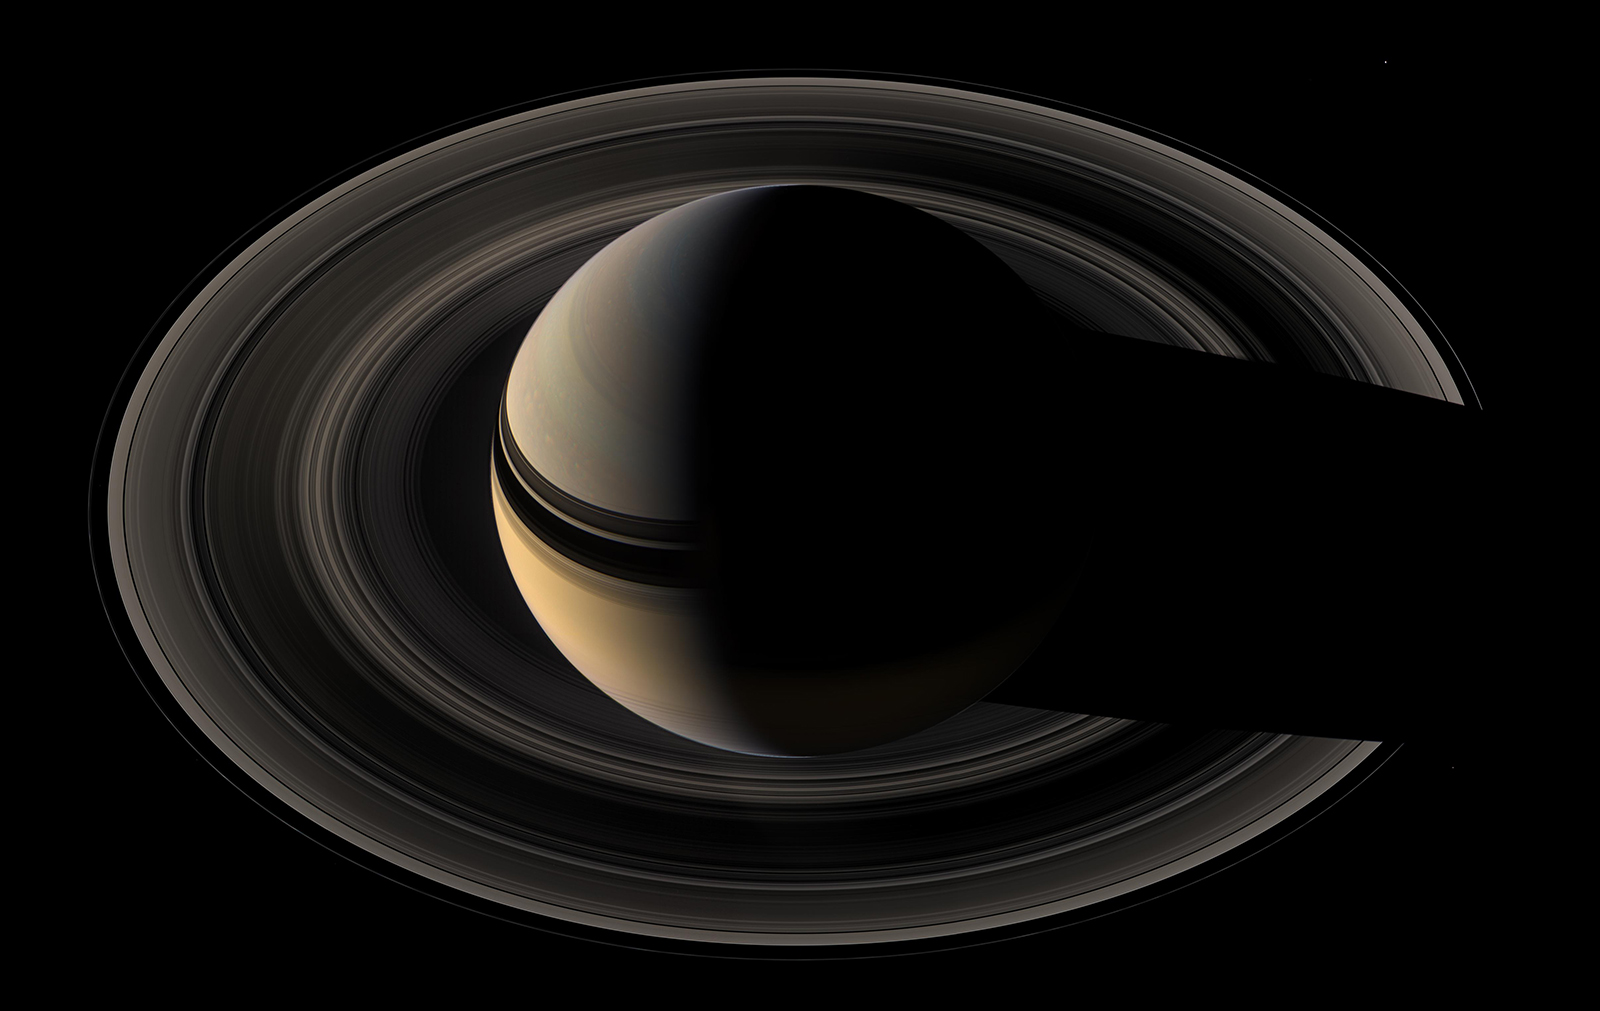 Saturn from above casting a dark shadow across its rings.